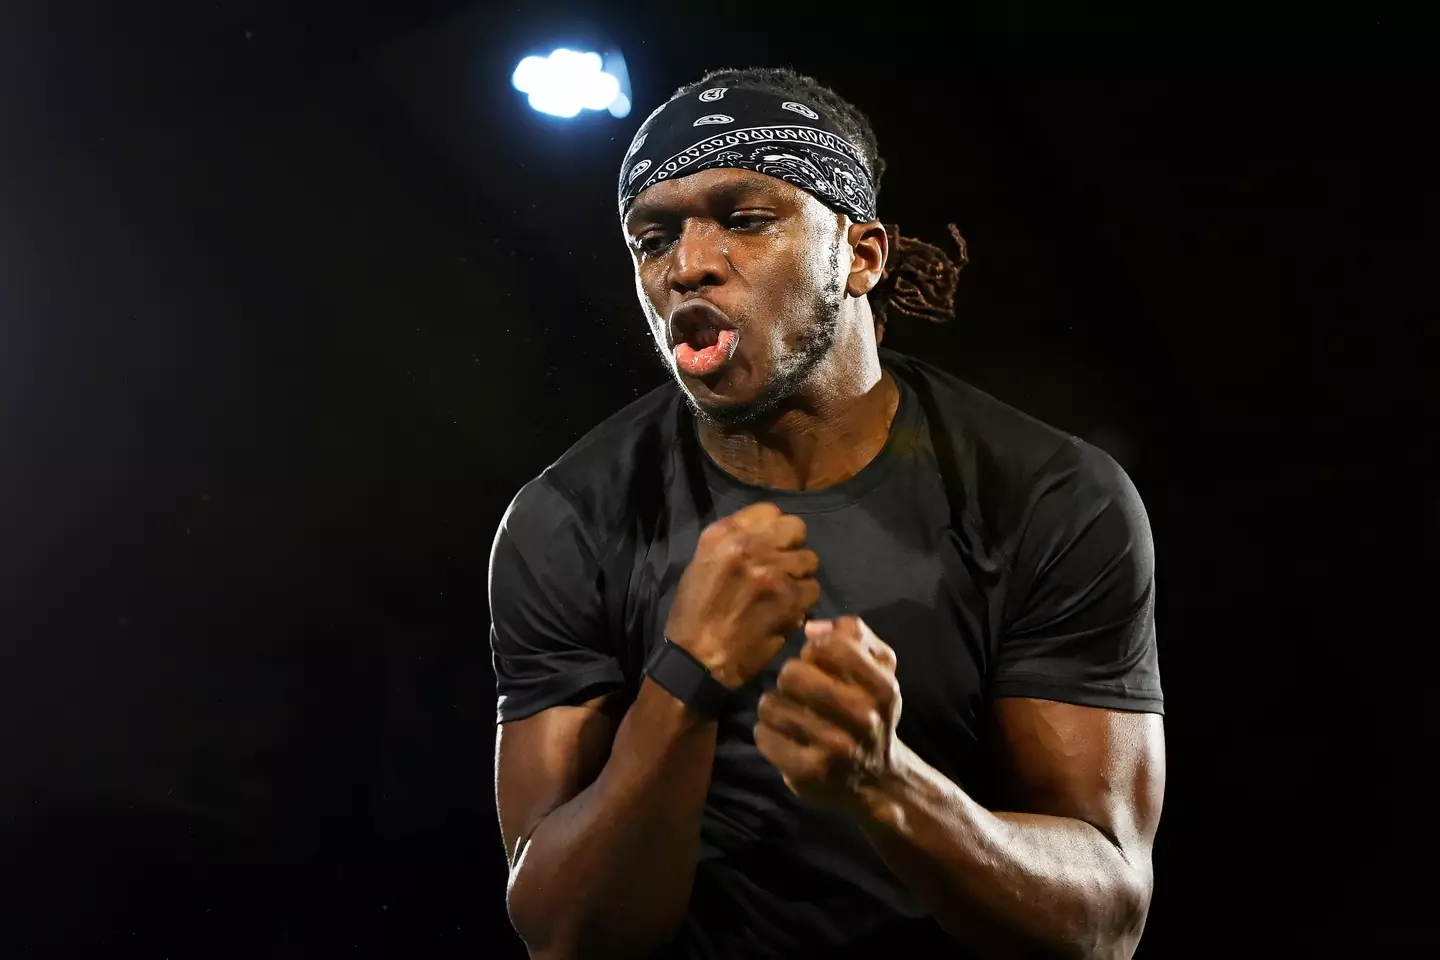 KSI will still get his fight, but the undercard rematch between Swarmz and Ryan Taylor is off.